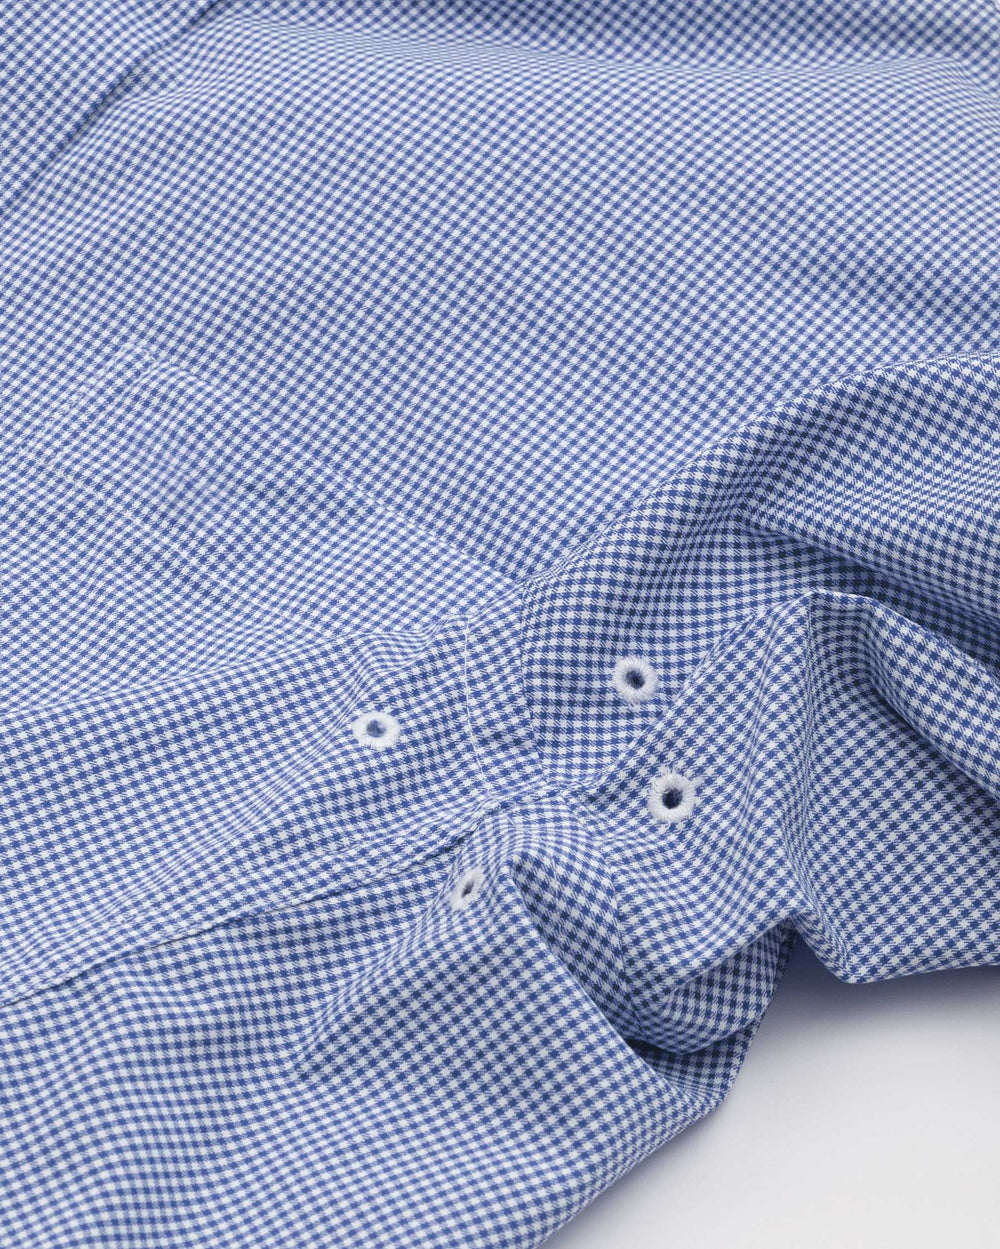 Arm vents of the Men's Light Blue Kentucky Wildcats Gingham Button Down Shirt by Southern Tide - University Blue